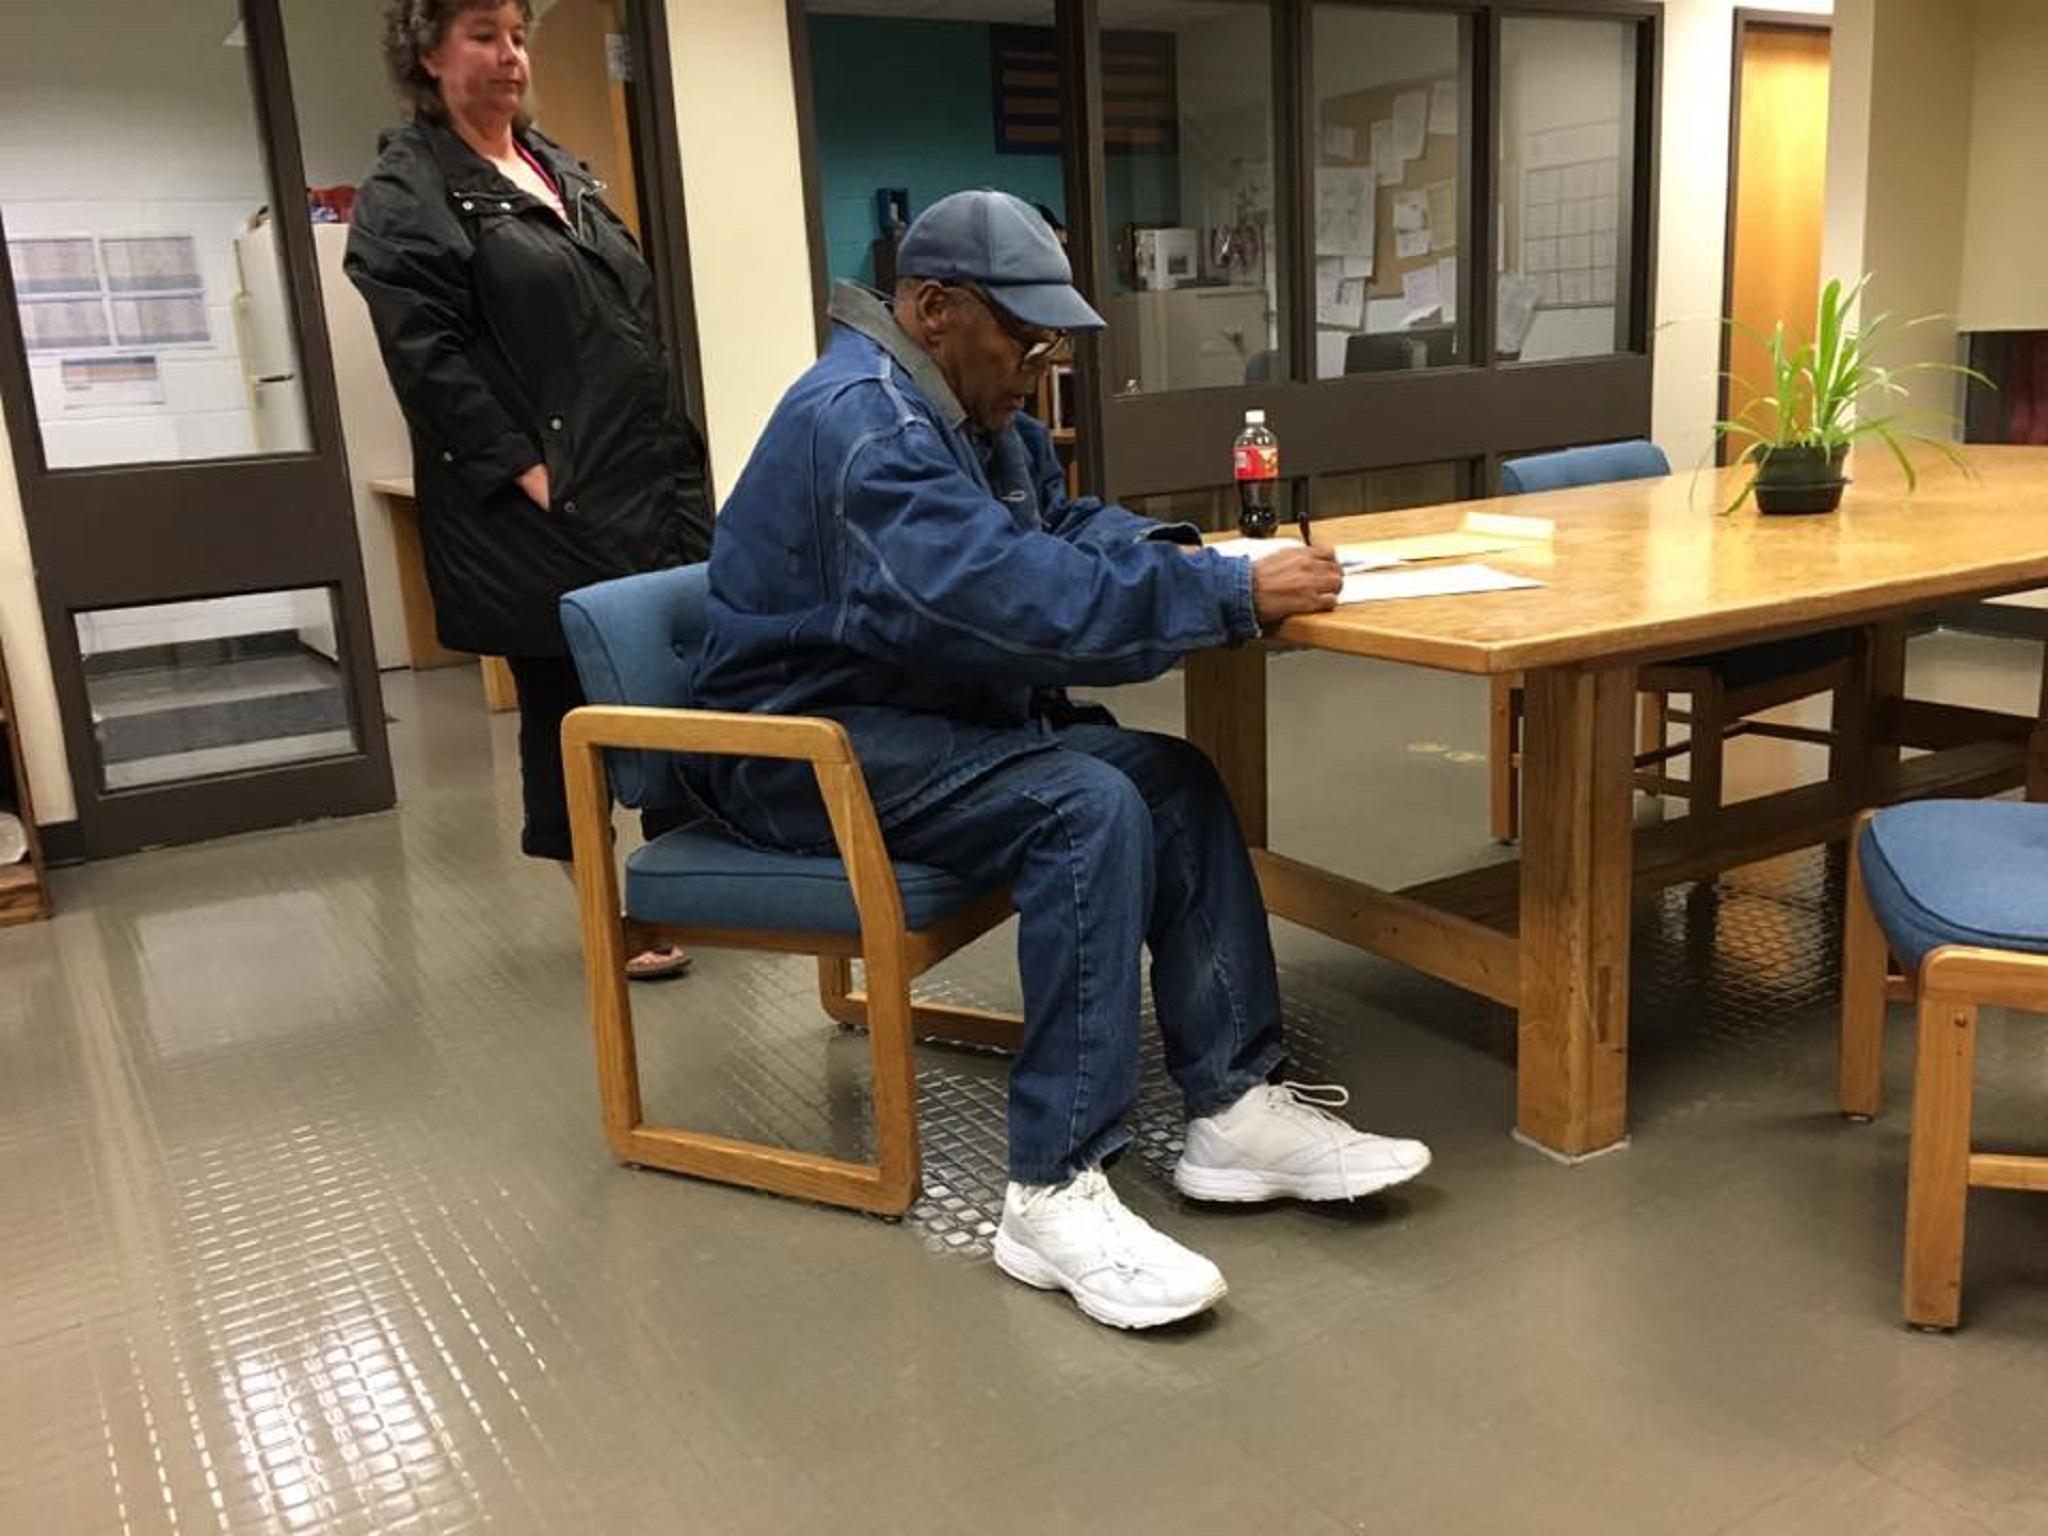 OJ Simpson is released from Lovelock Correctional Centre, Nevada